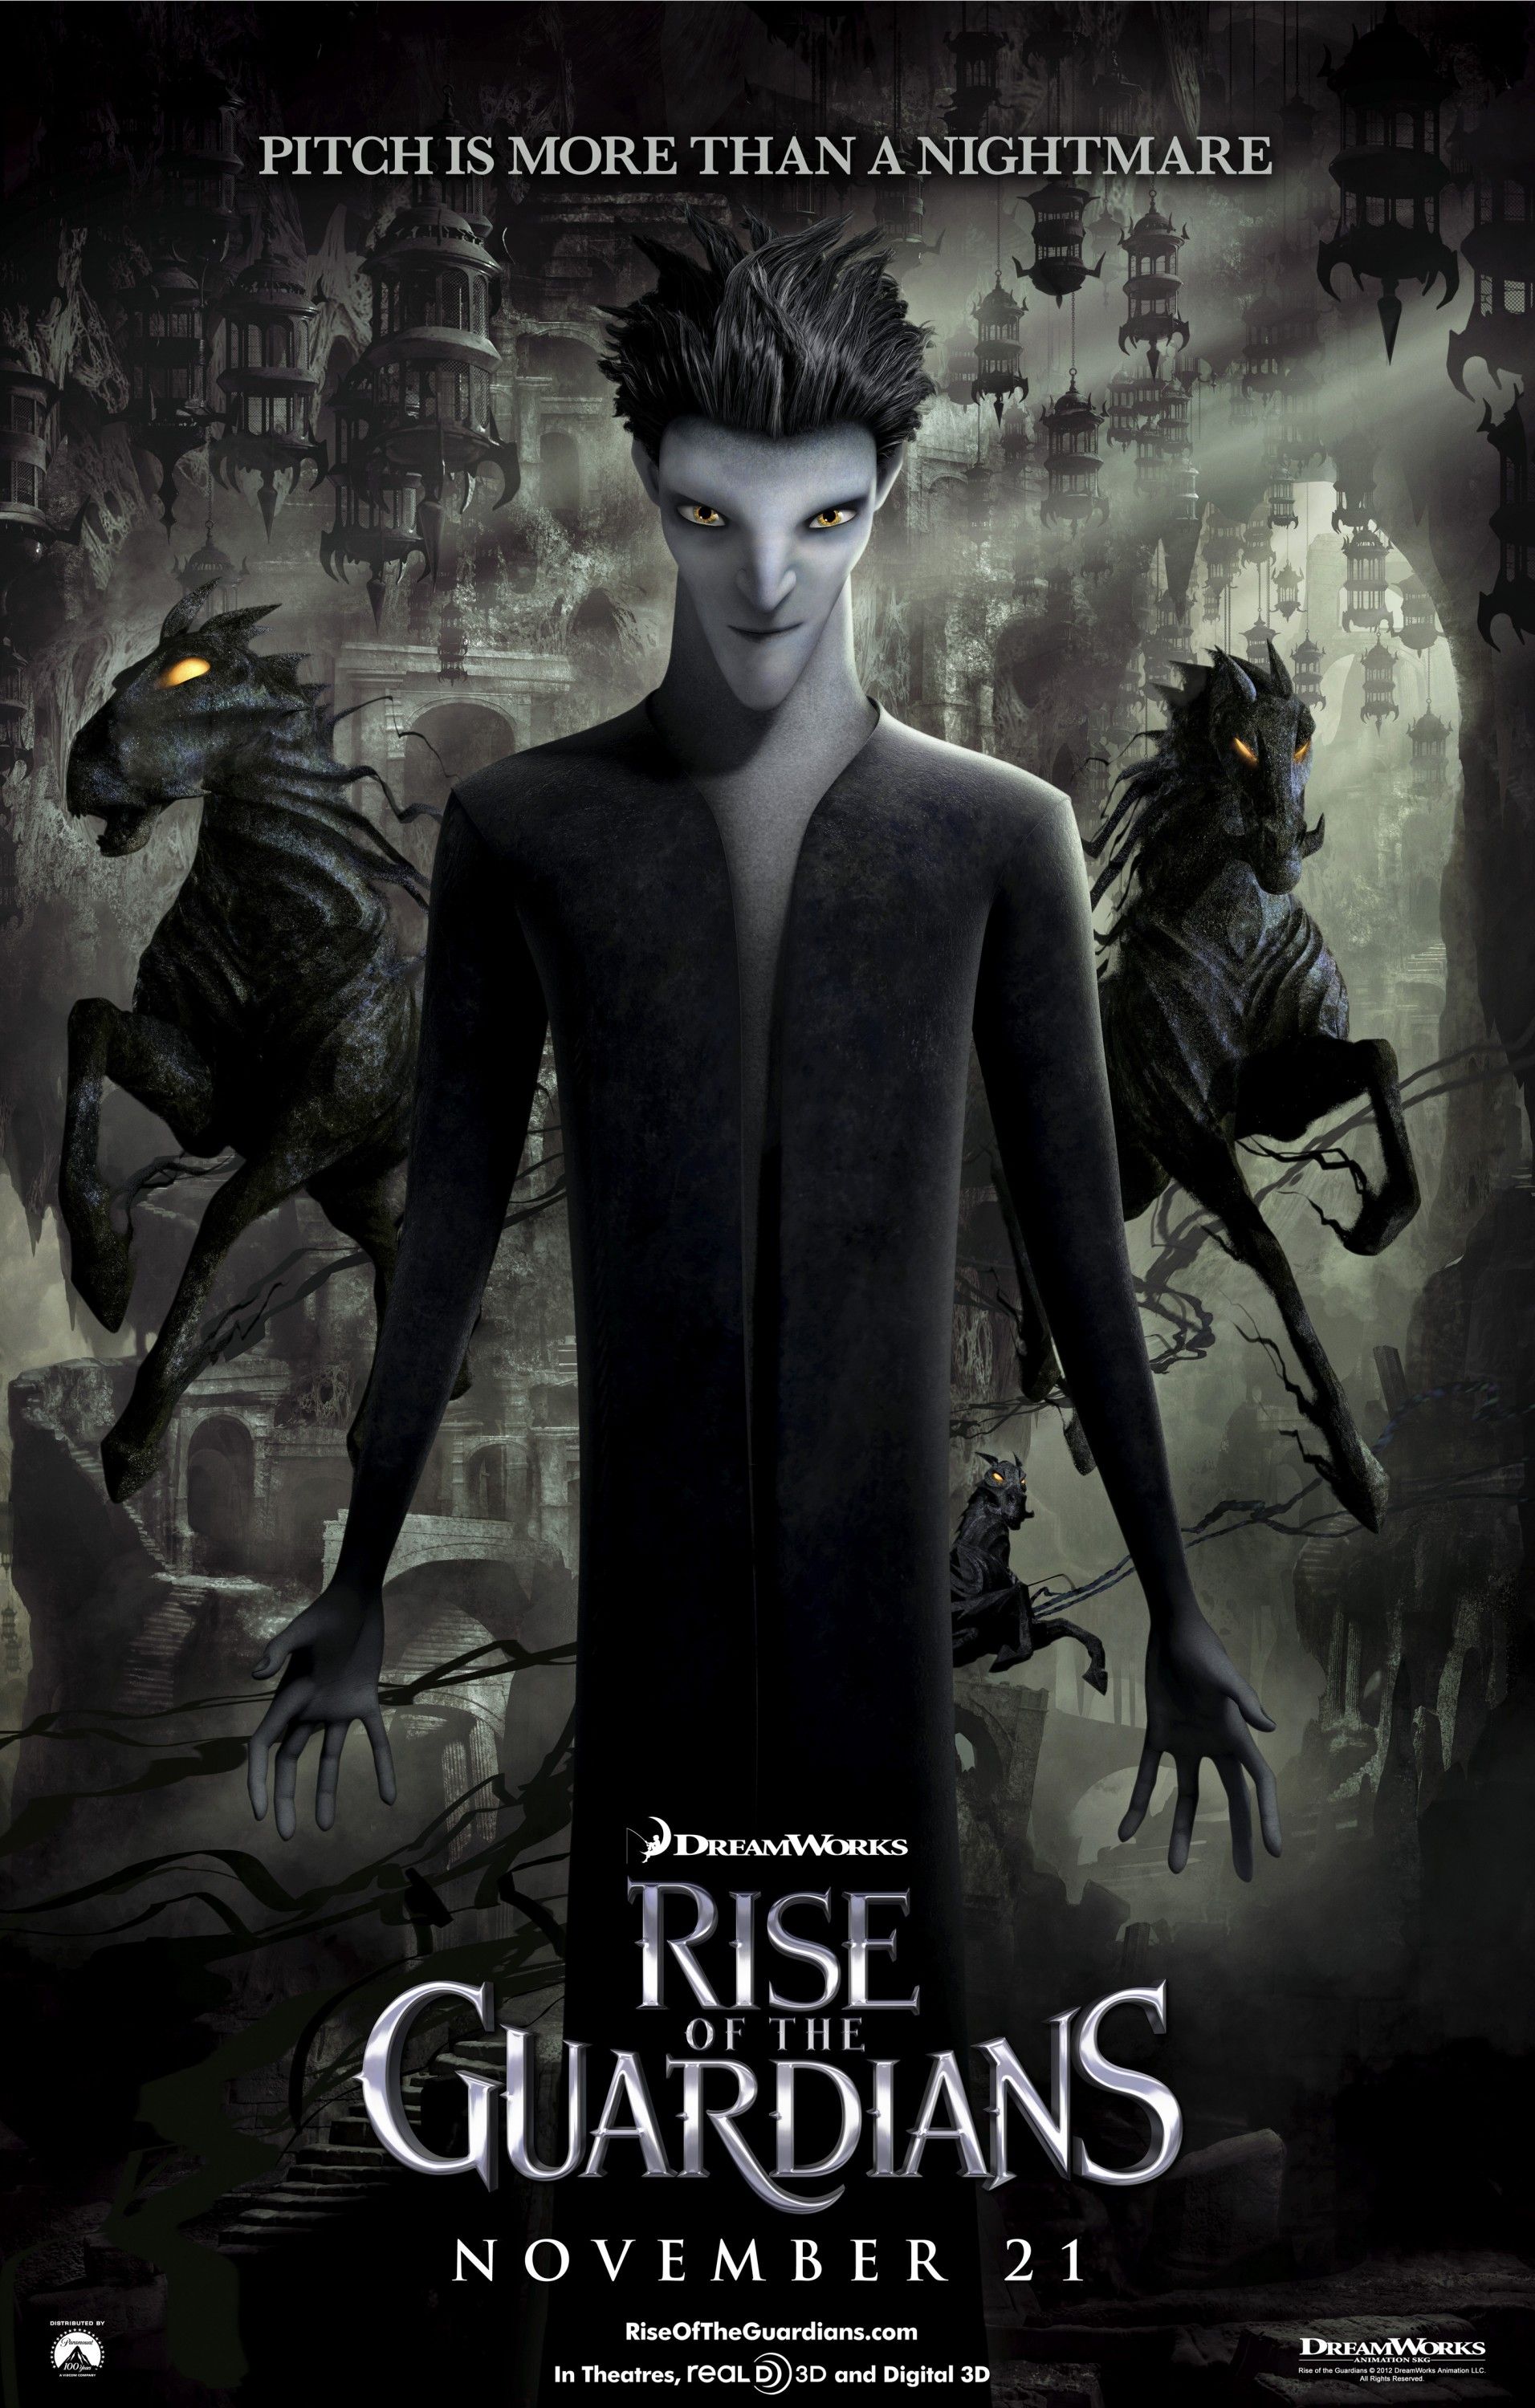 Rise of the Guardians Pitch Character Poster